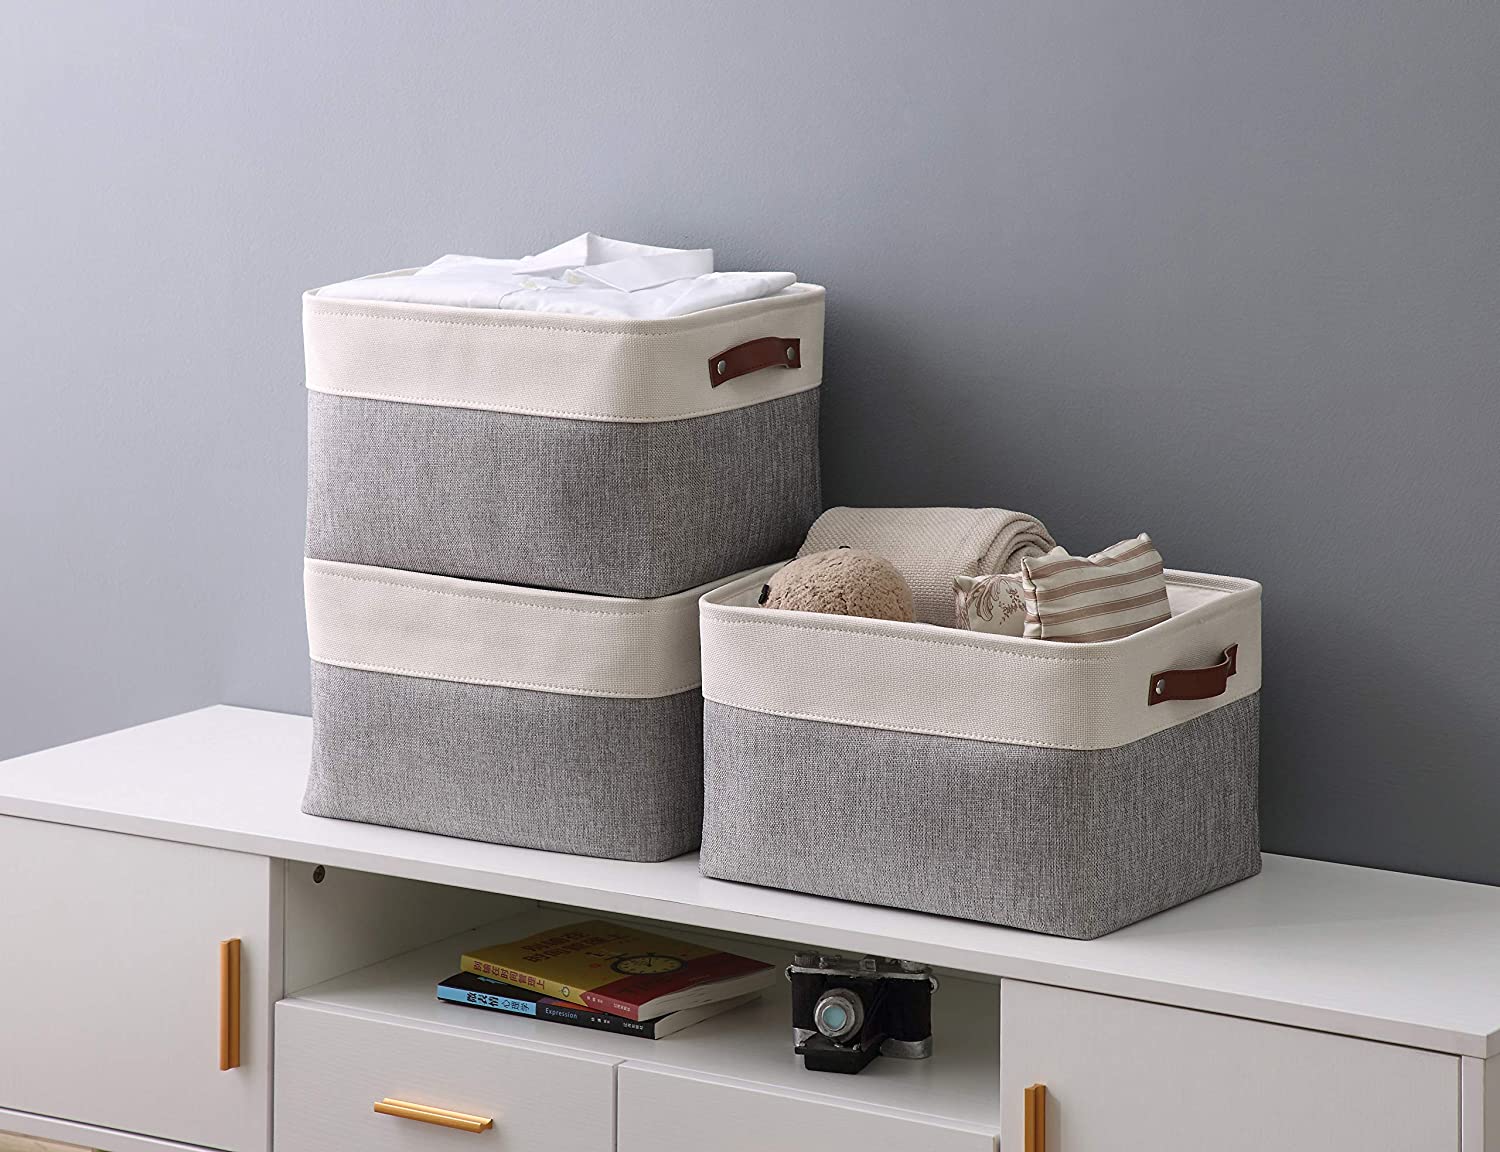 Mint Green/White Fabric Storage Bins with Textured Print for Clothing and Accessories mDesign Set of 6 Wardrobe Storage Boxes Bedroom Storage Units for Drawer Organisation 